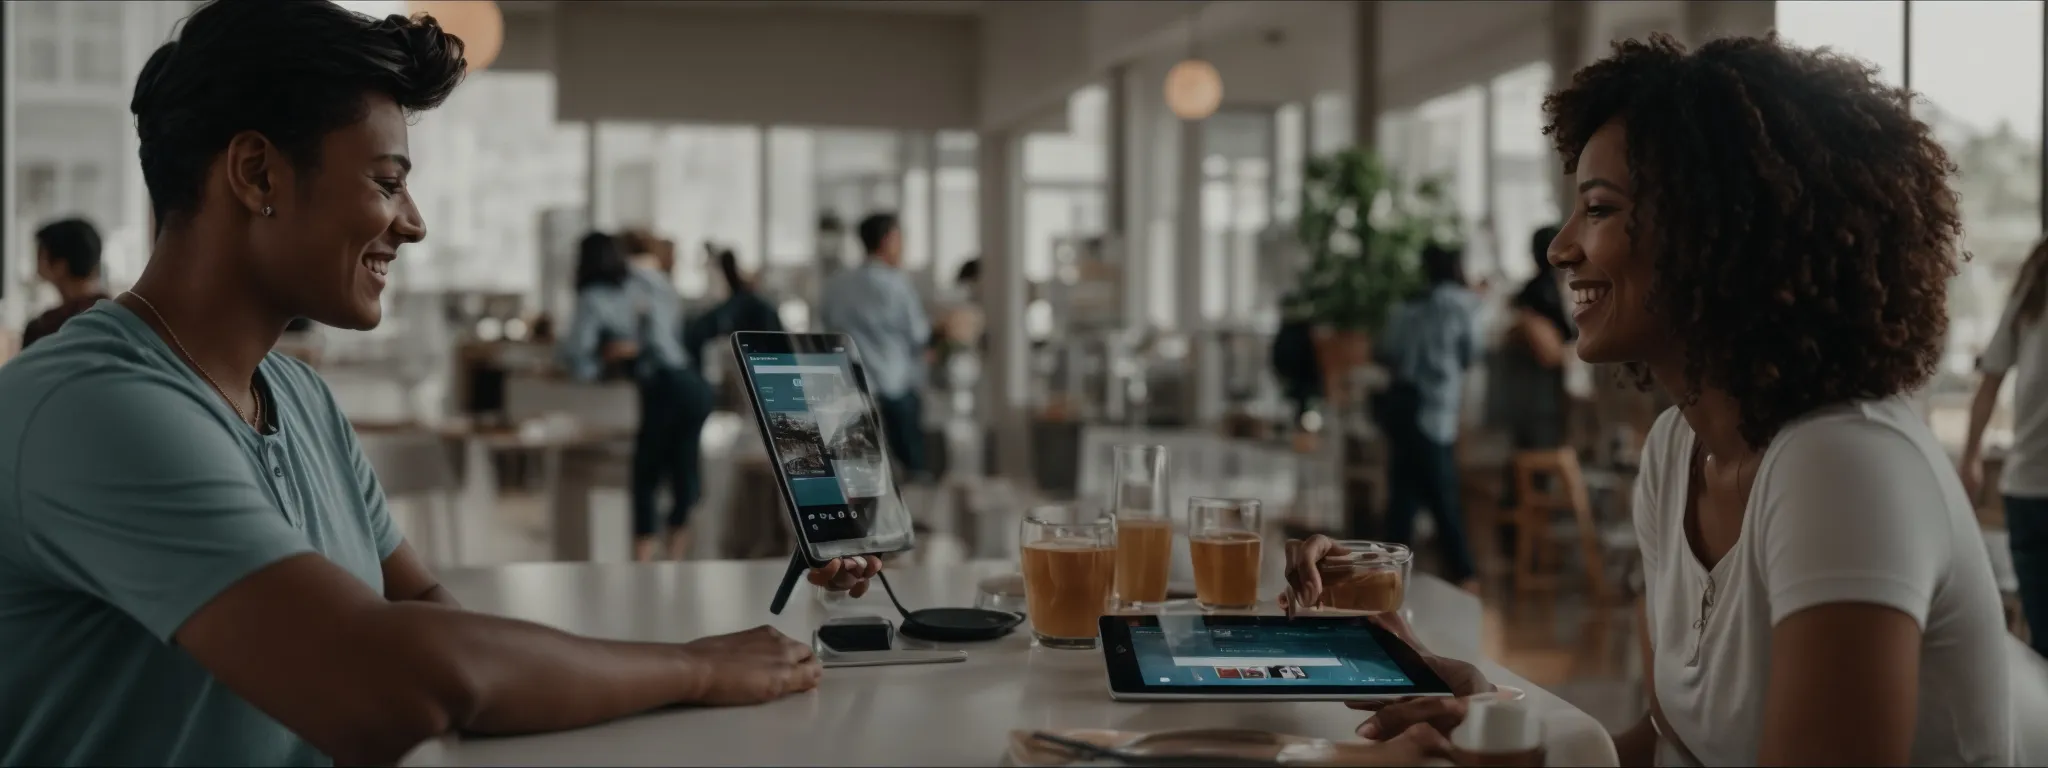 a satisfied customer cheerfully interacts with a user-friendly digital interface on a tablet in a bright, modern setting.